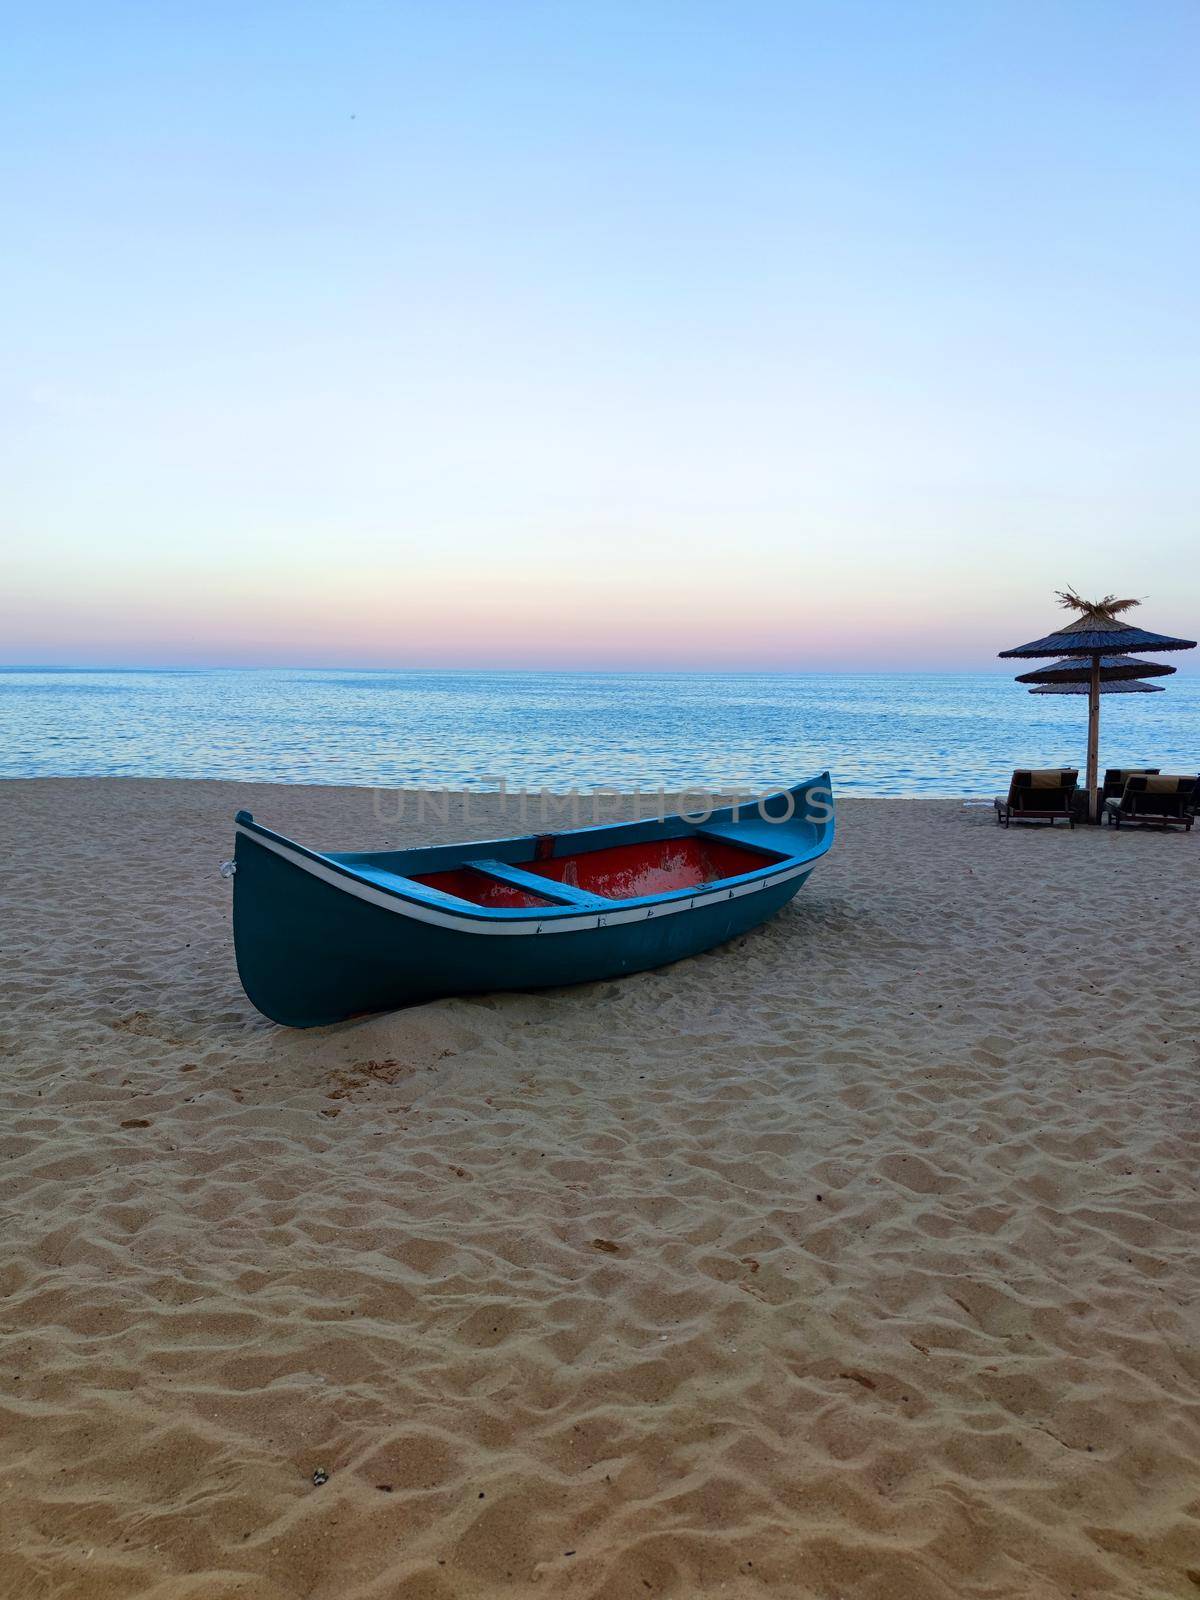 empty old wooden boat on the sand against the background of the sea horizon and sunset sky by Annado